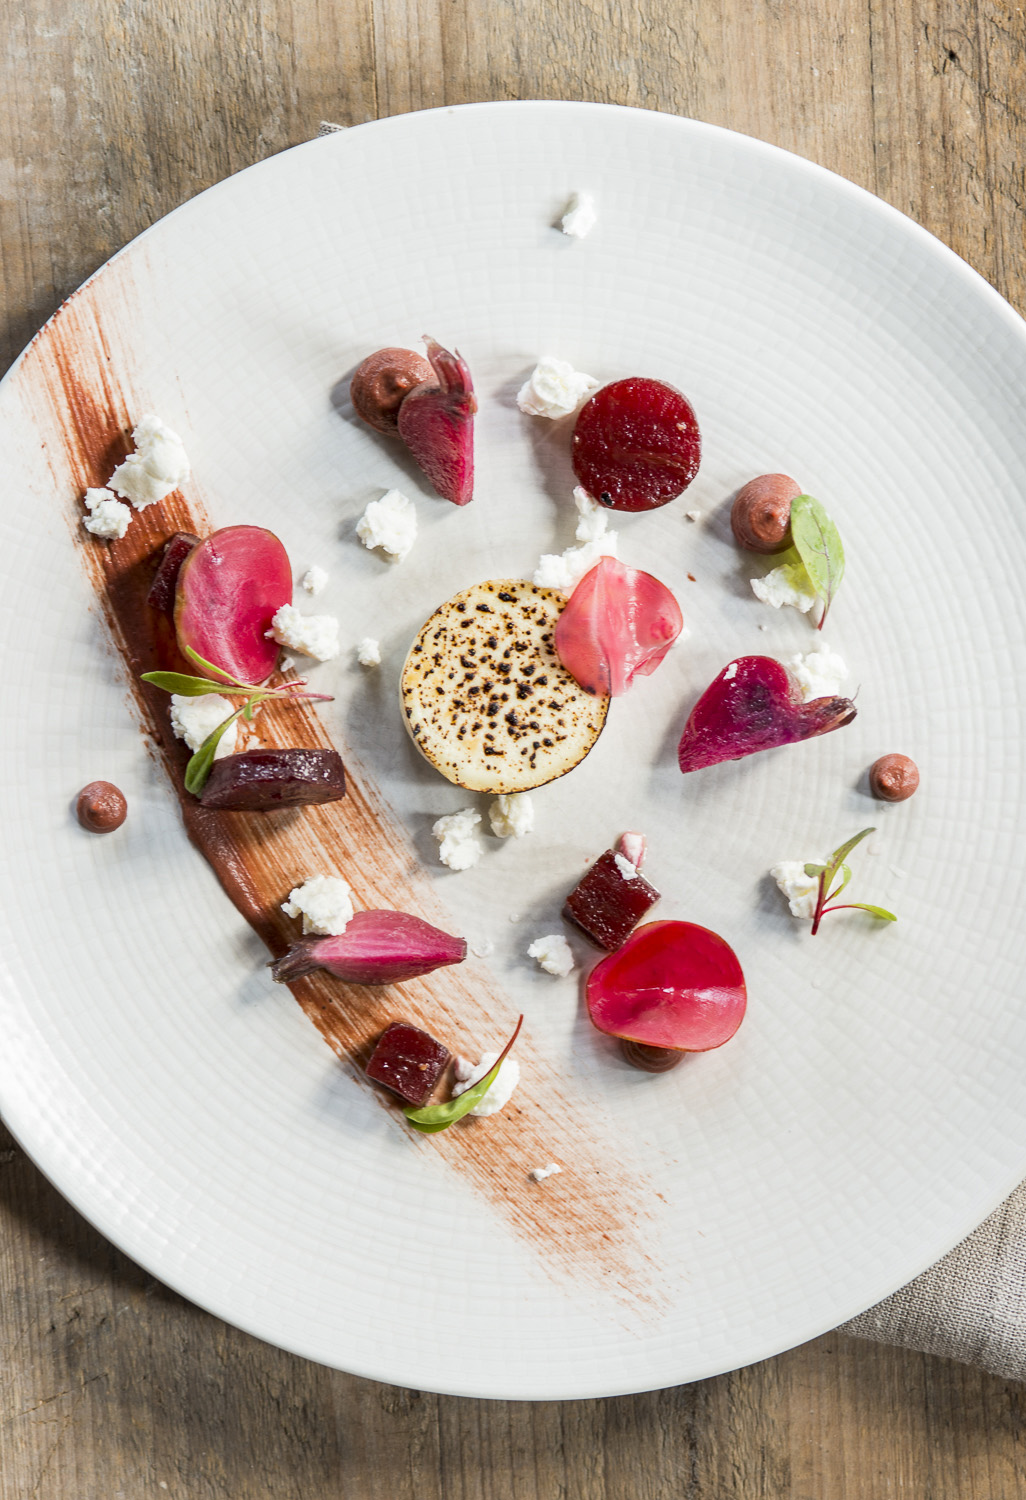 Goats cheese with beets